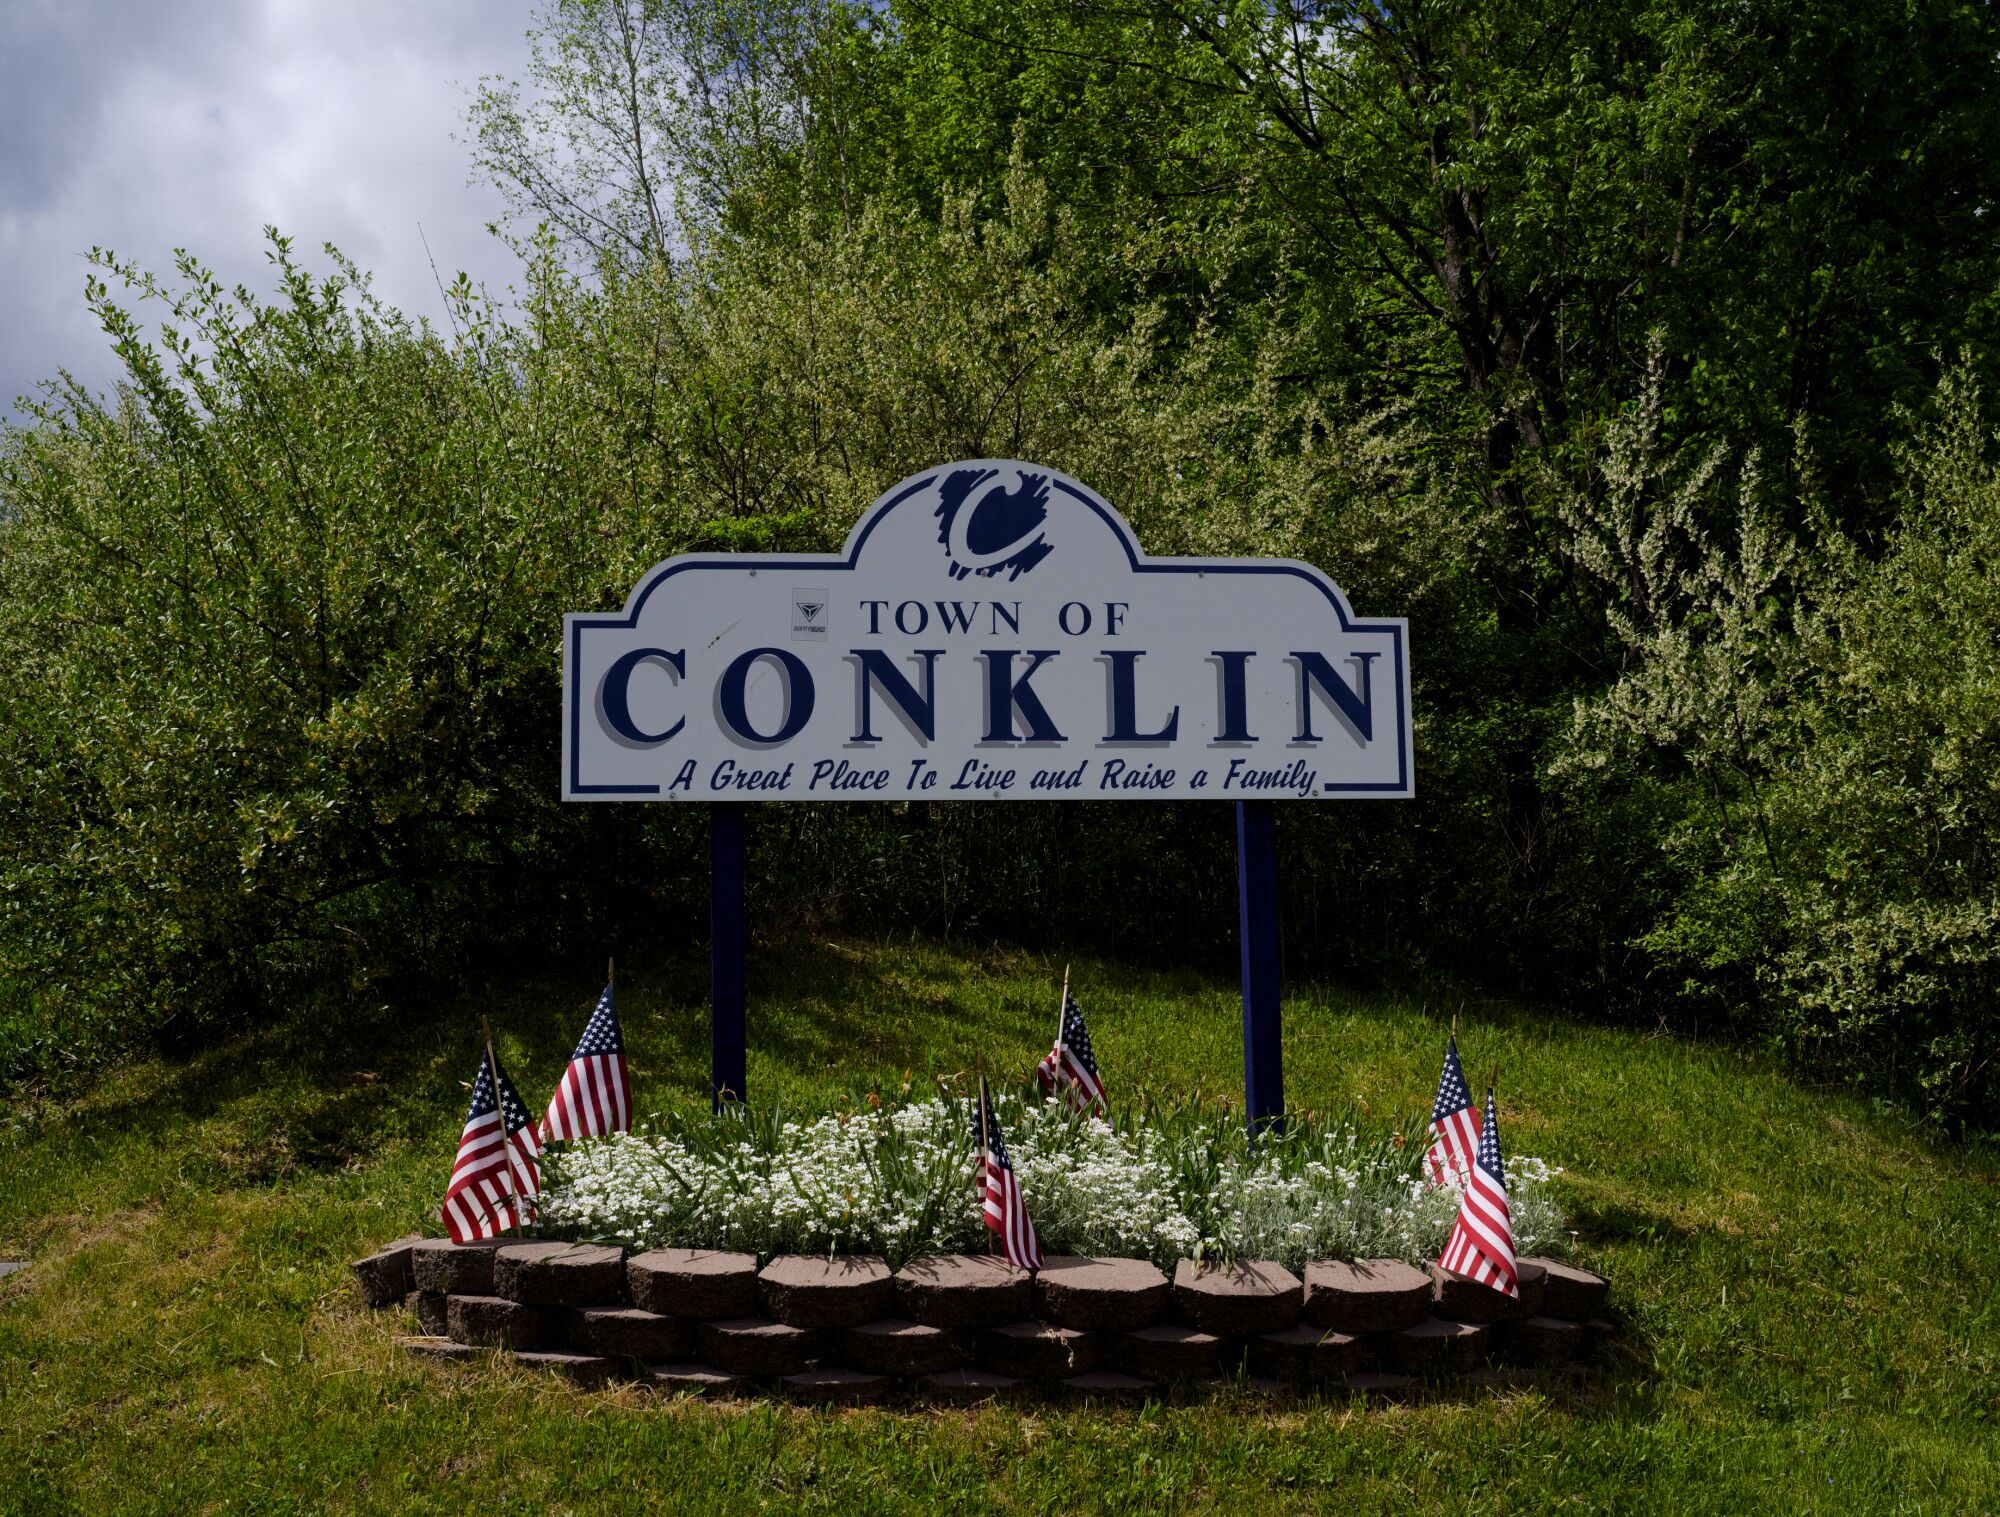 An outdoor sign says "Town of Conklin."